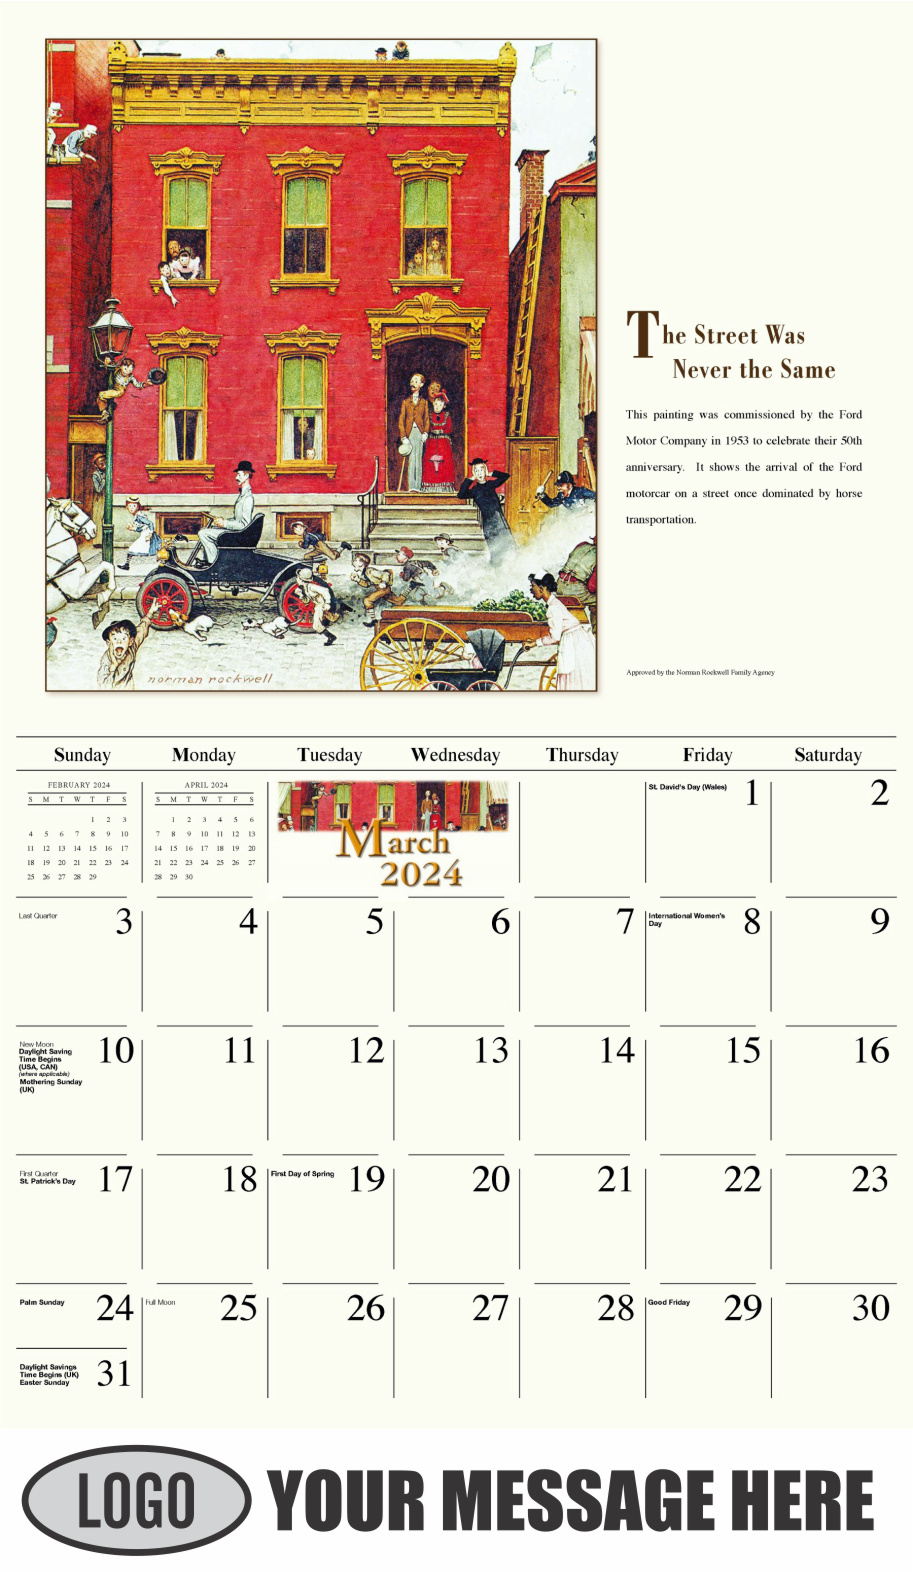 Memorable Images by Norman Rockwell 2024 Business Promotional Wall Calendar - March